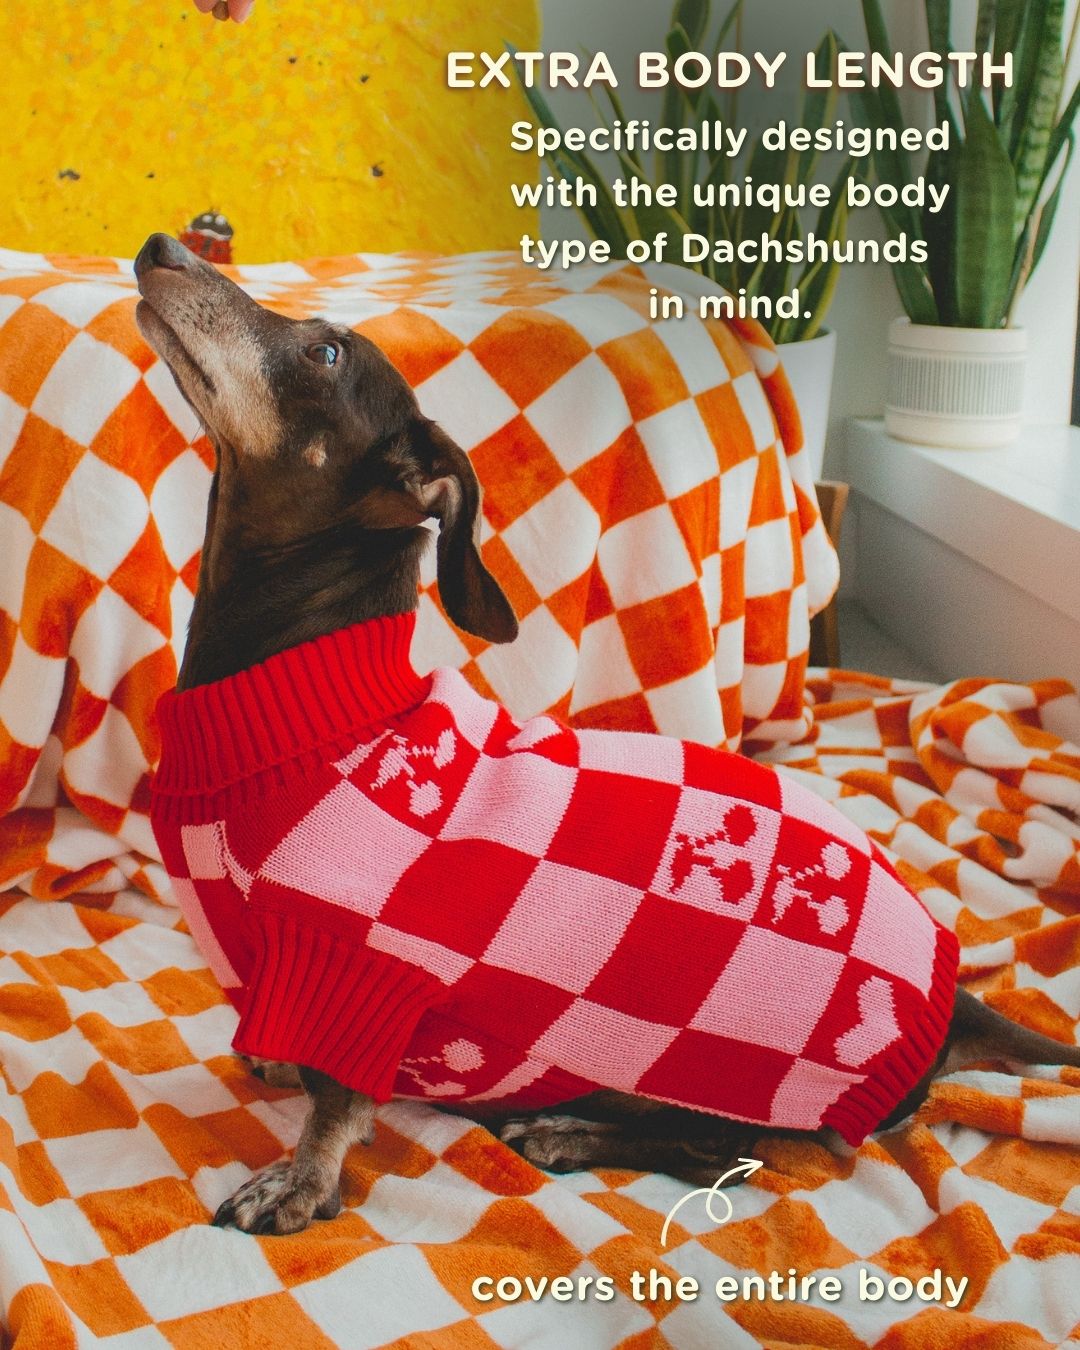 Specifically Designed for Dachshunds